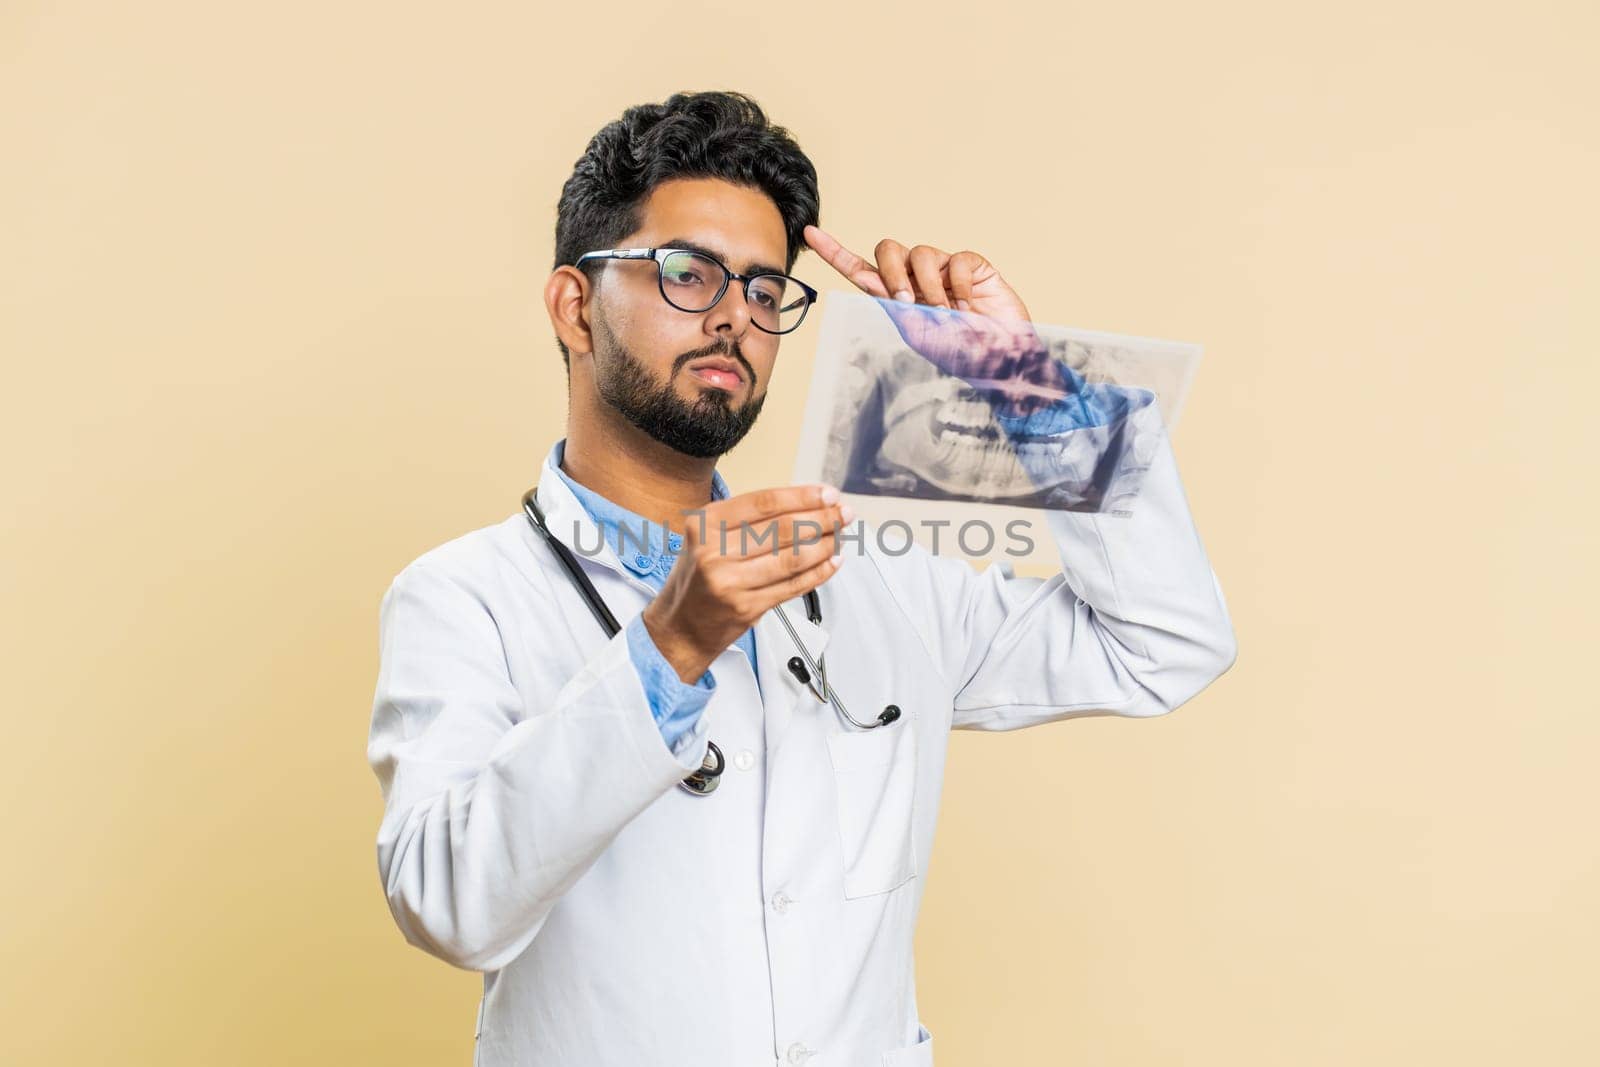 Indian young doctor orthodontist man examines a panoramic x-ray picture of the jaw teeth. 3D model of the patient's mouth, MRI scan. Dentistry, oral care. Arabian stomatology guy on beige background